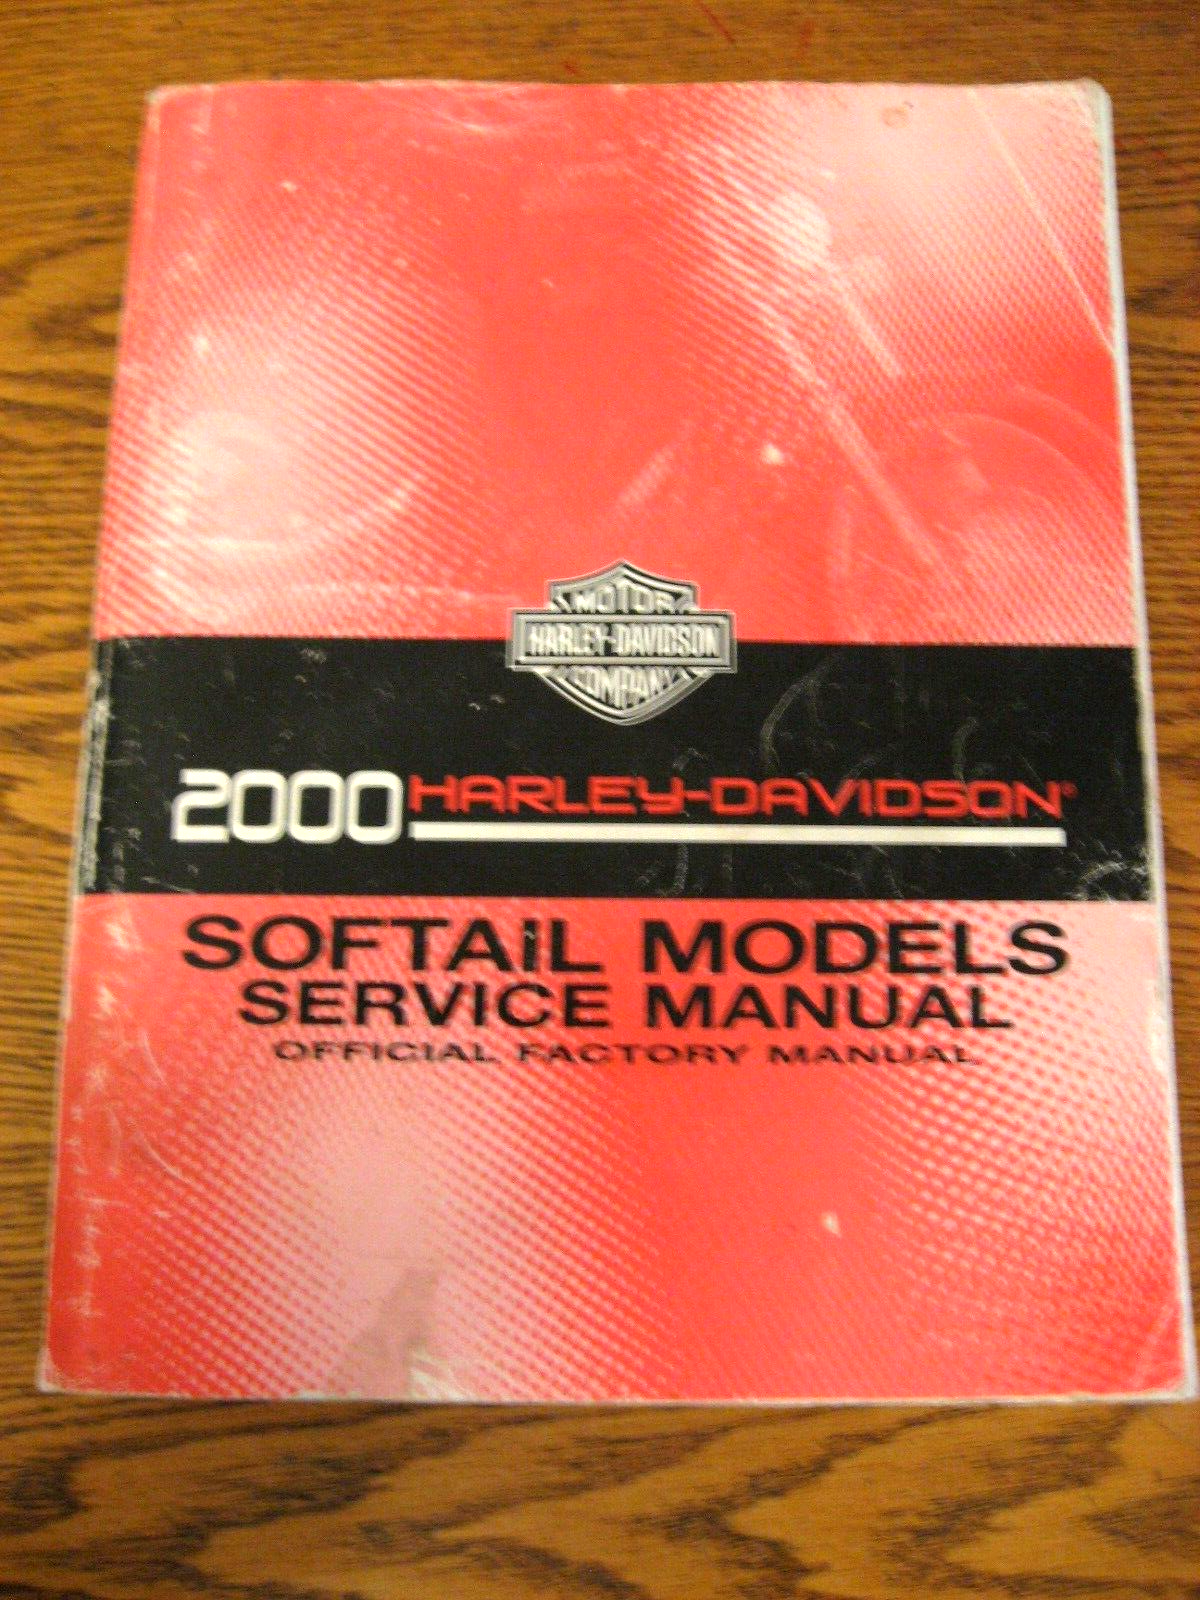 Primary image for 2000 Harley-Davidson Softail SERVICE  MANUAL + Owners Manual